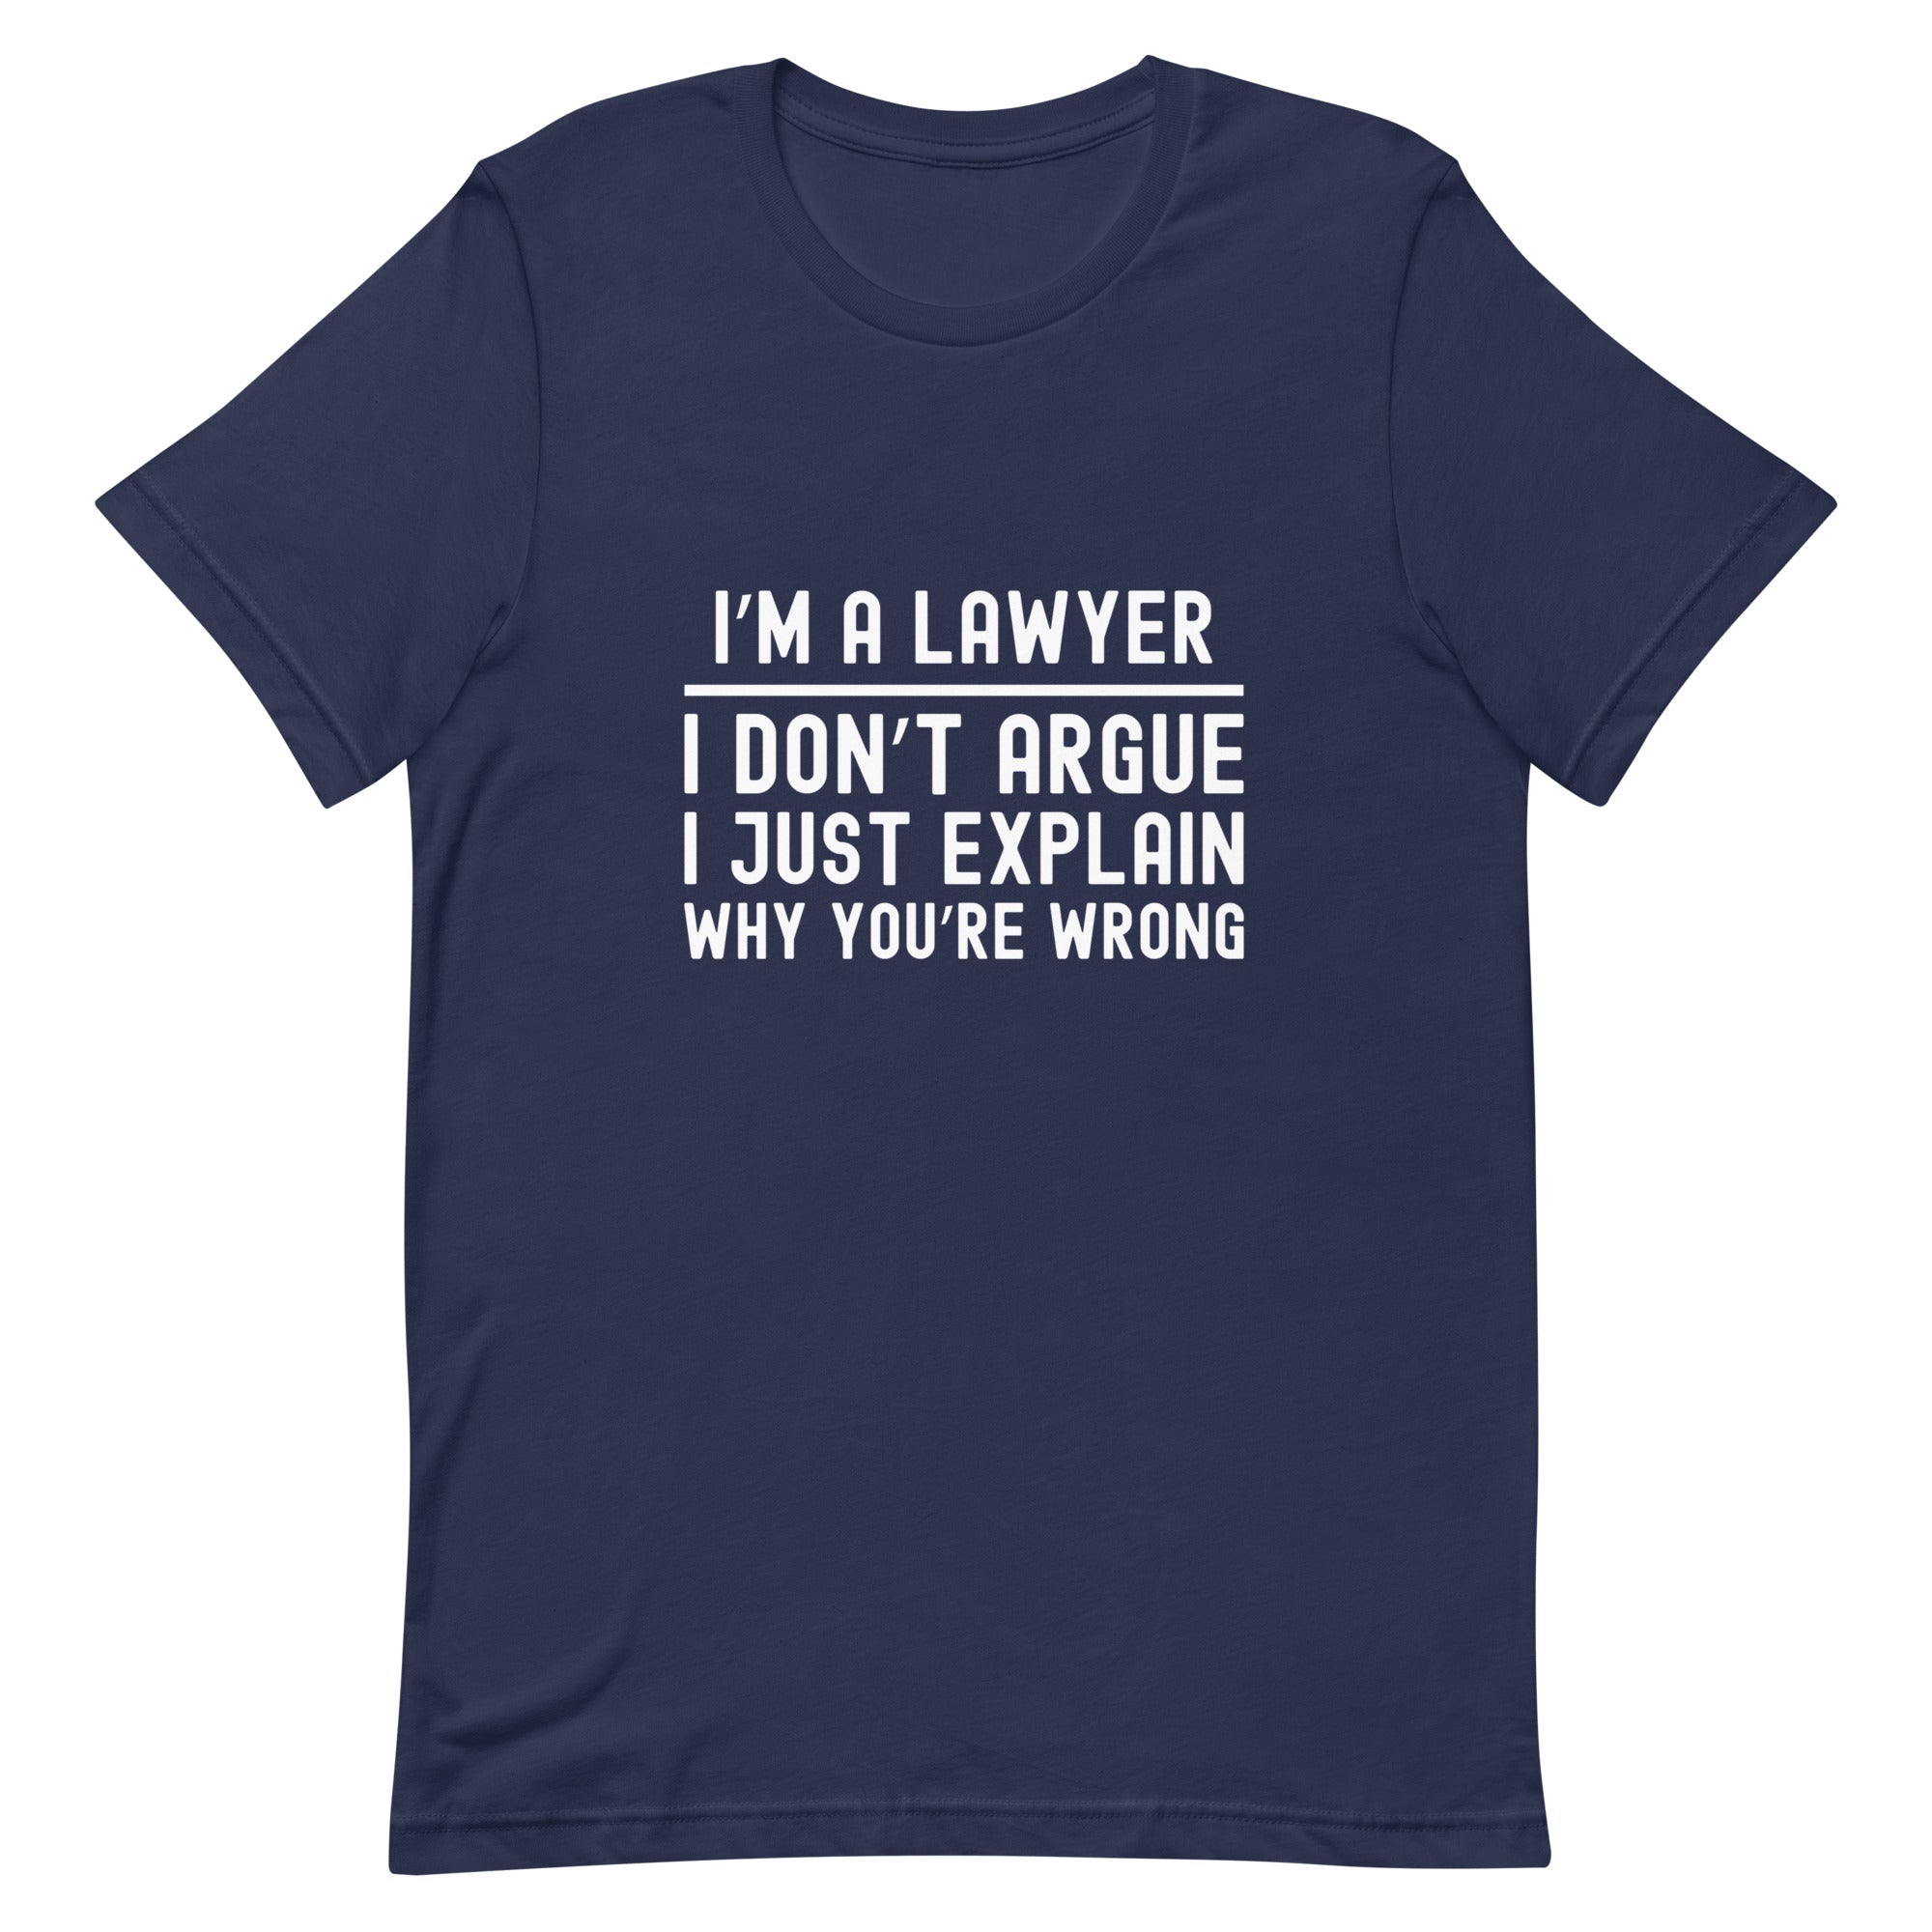 Unisex t-shirt | I’m a lawyer, I don’t argue, I just explain why you’re wrong